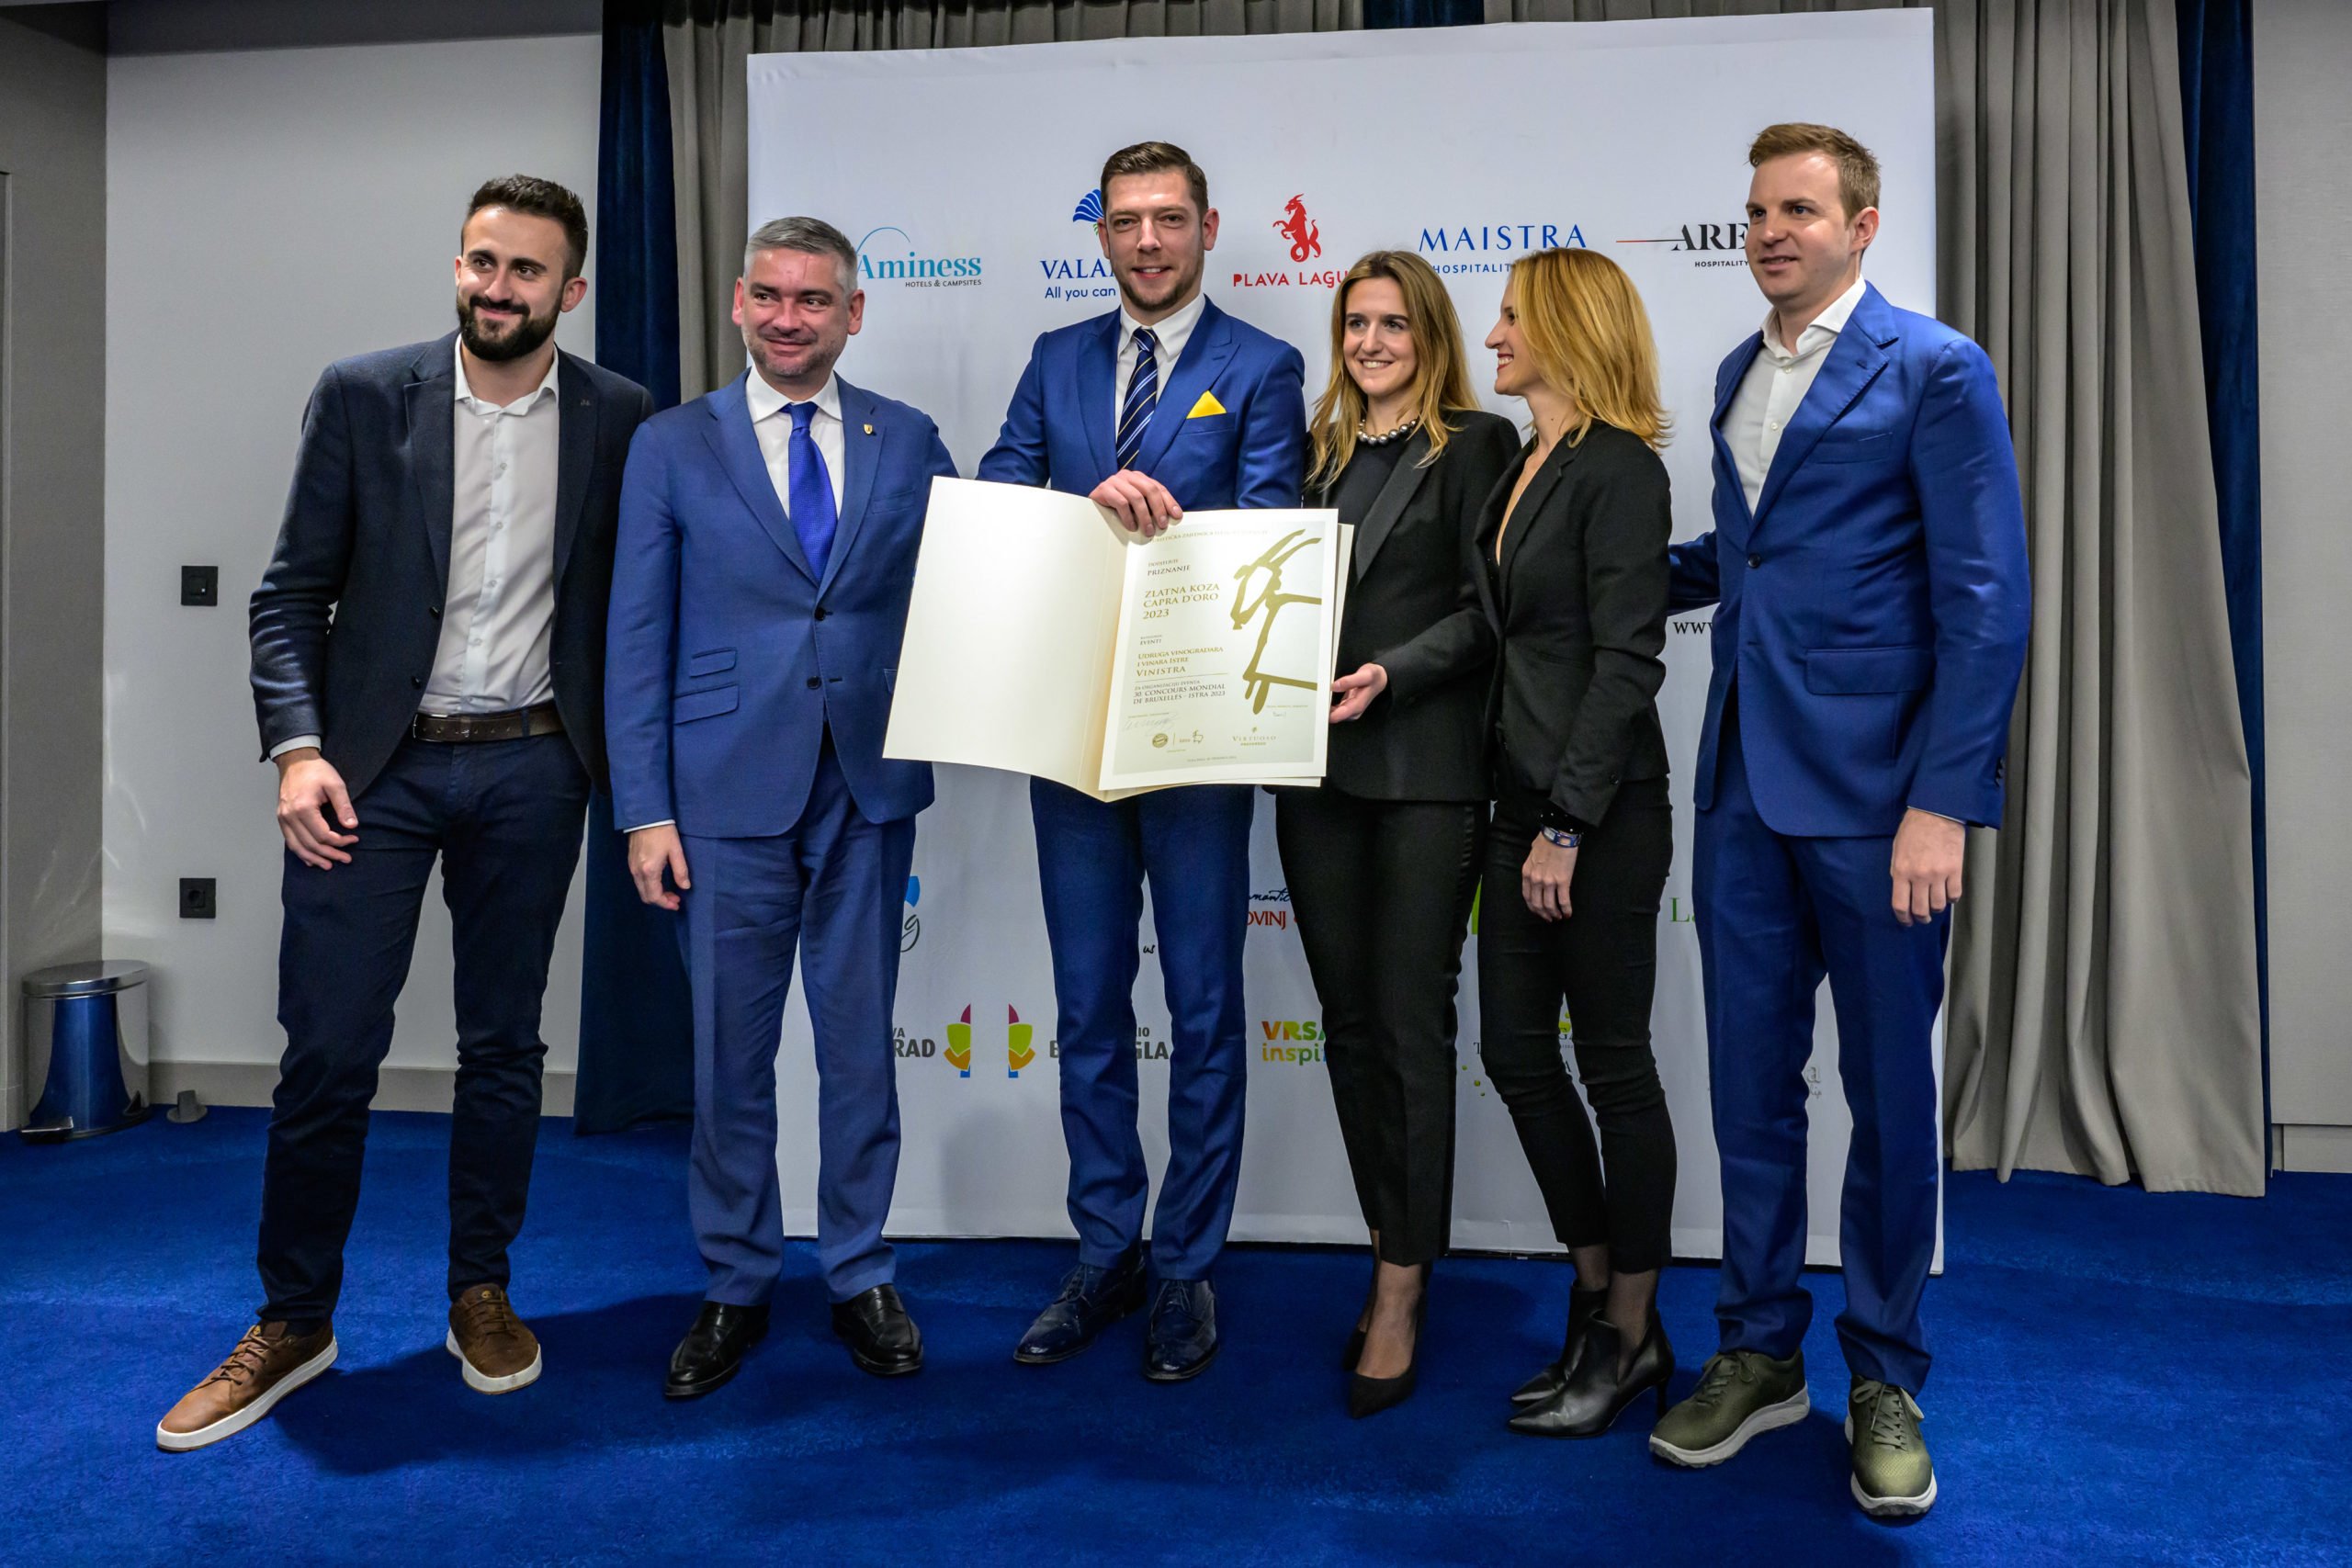 CMB & Vinistra awarded the Golden Goat for the excellently organized CMB 2023